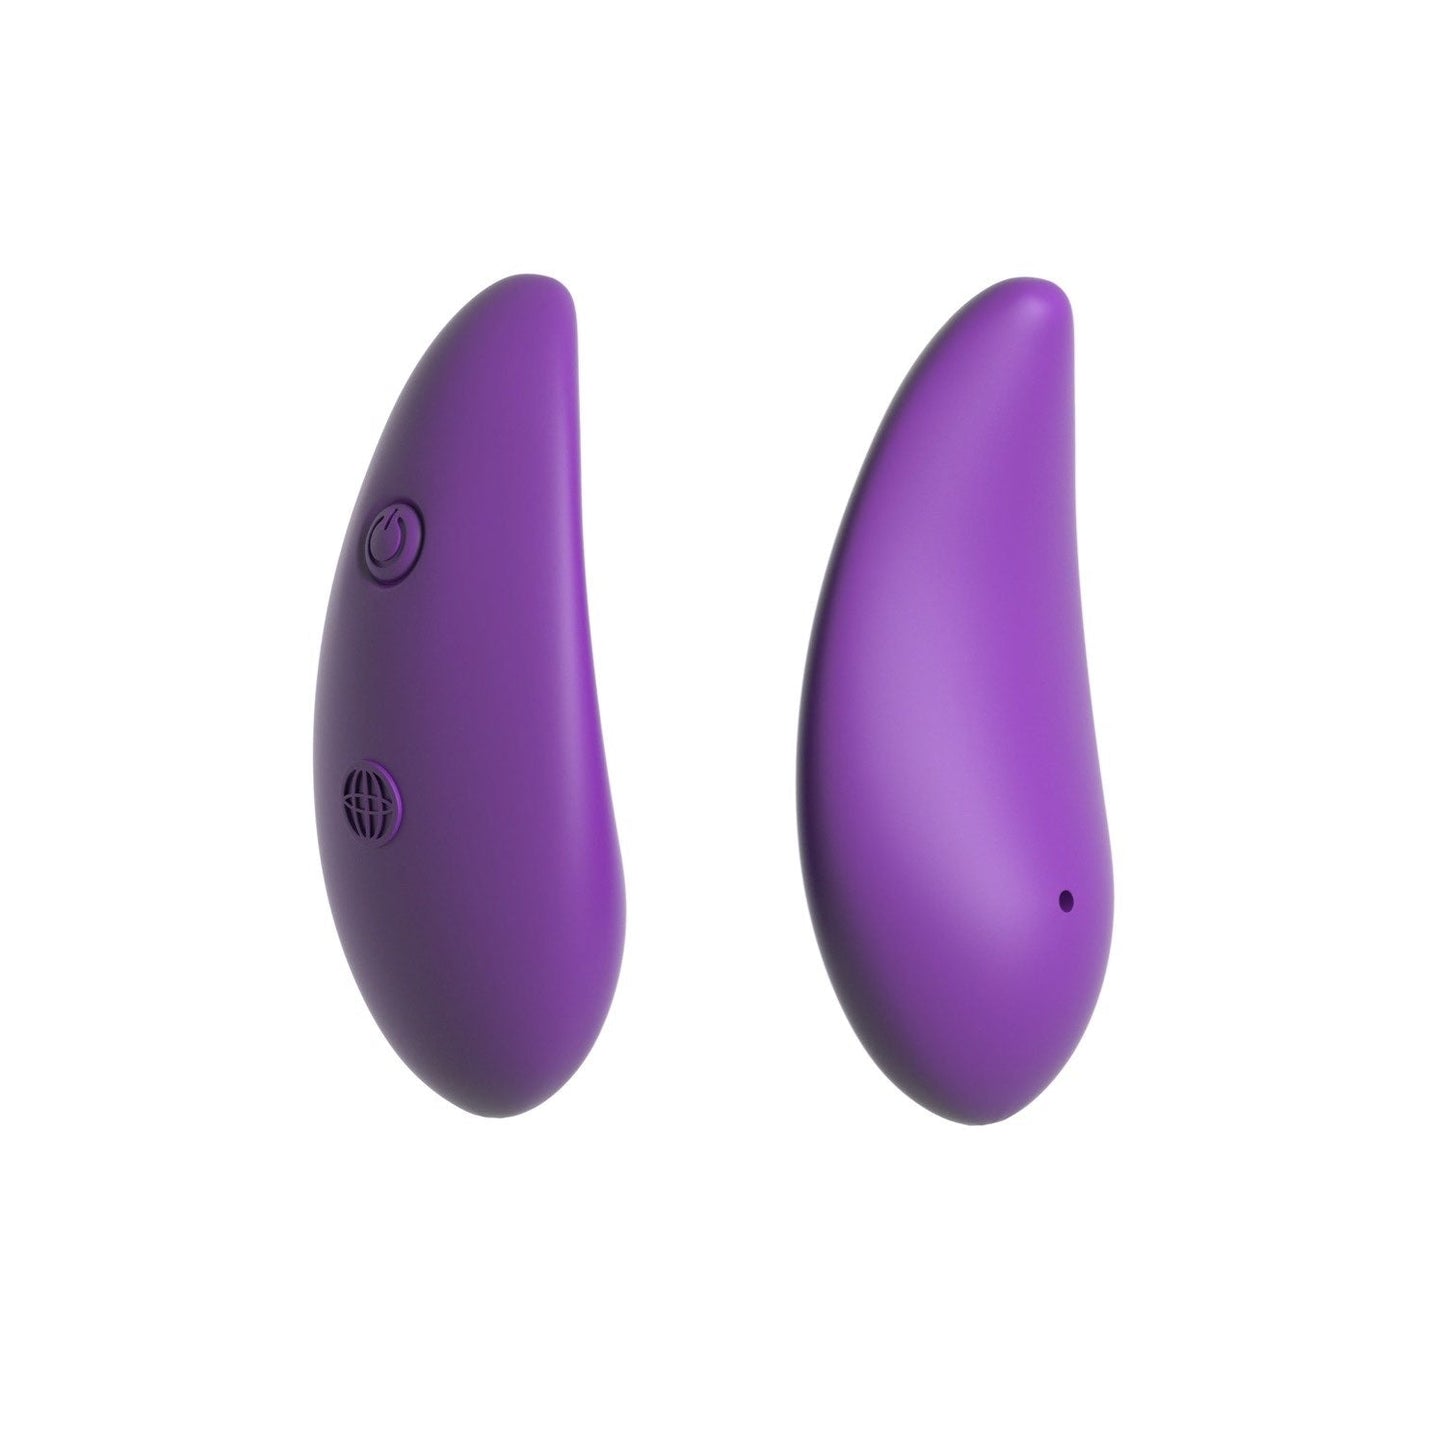 Crotchless Panty Thrill-Her - Purple Vibrating Panties with Wireless Remote